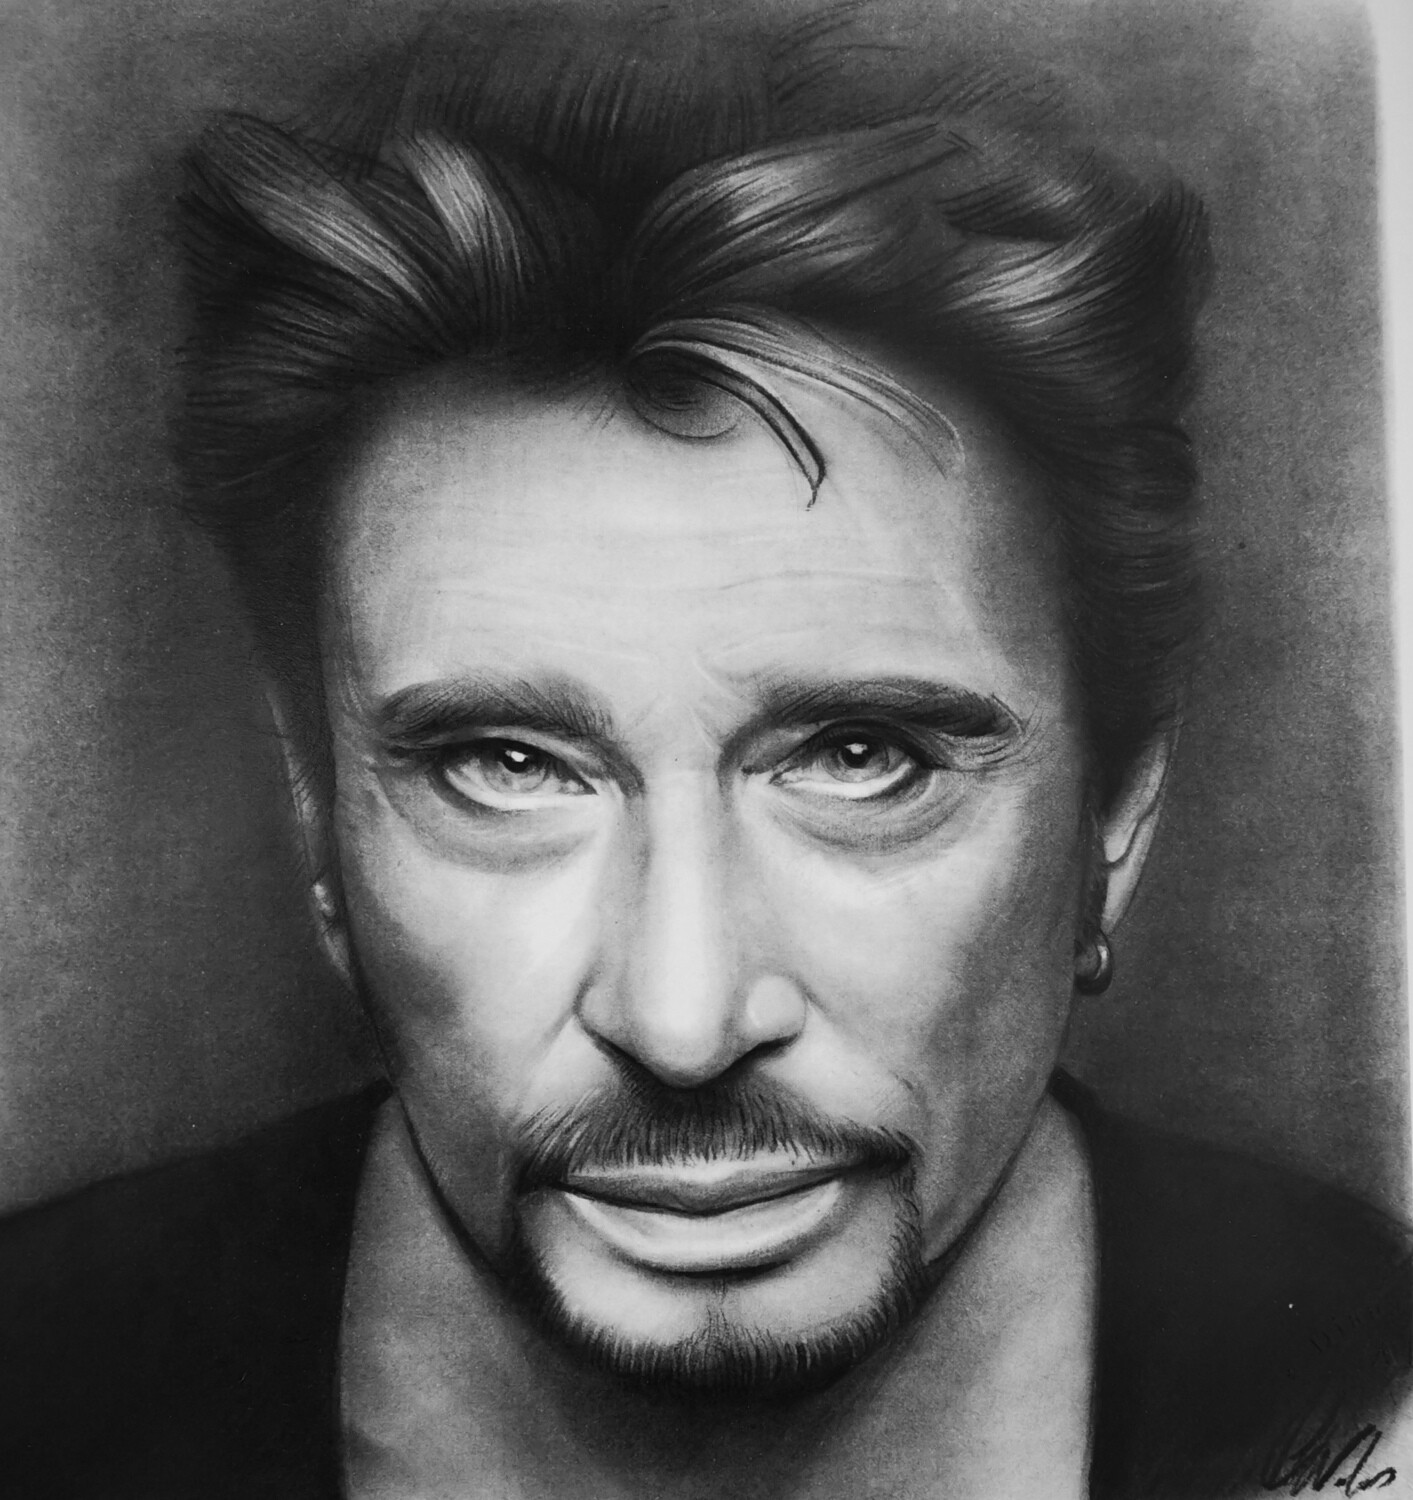 Johnny Hallyday /Limited edition print 1 /100 pieces